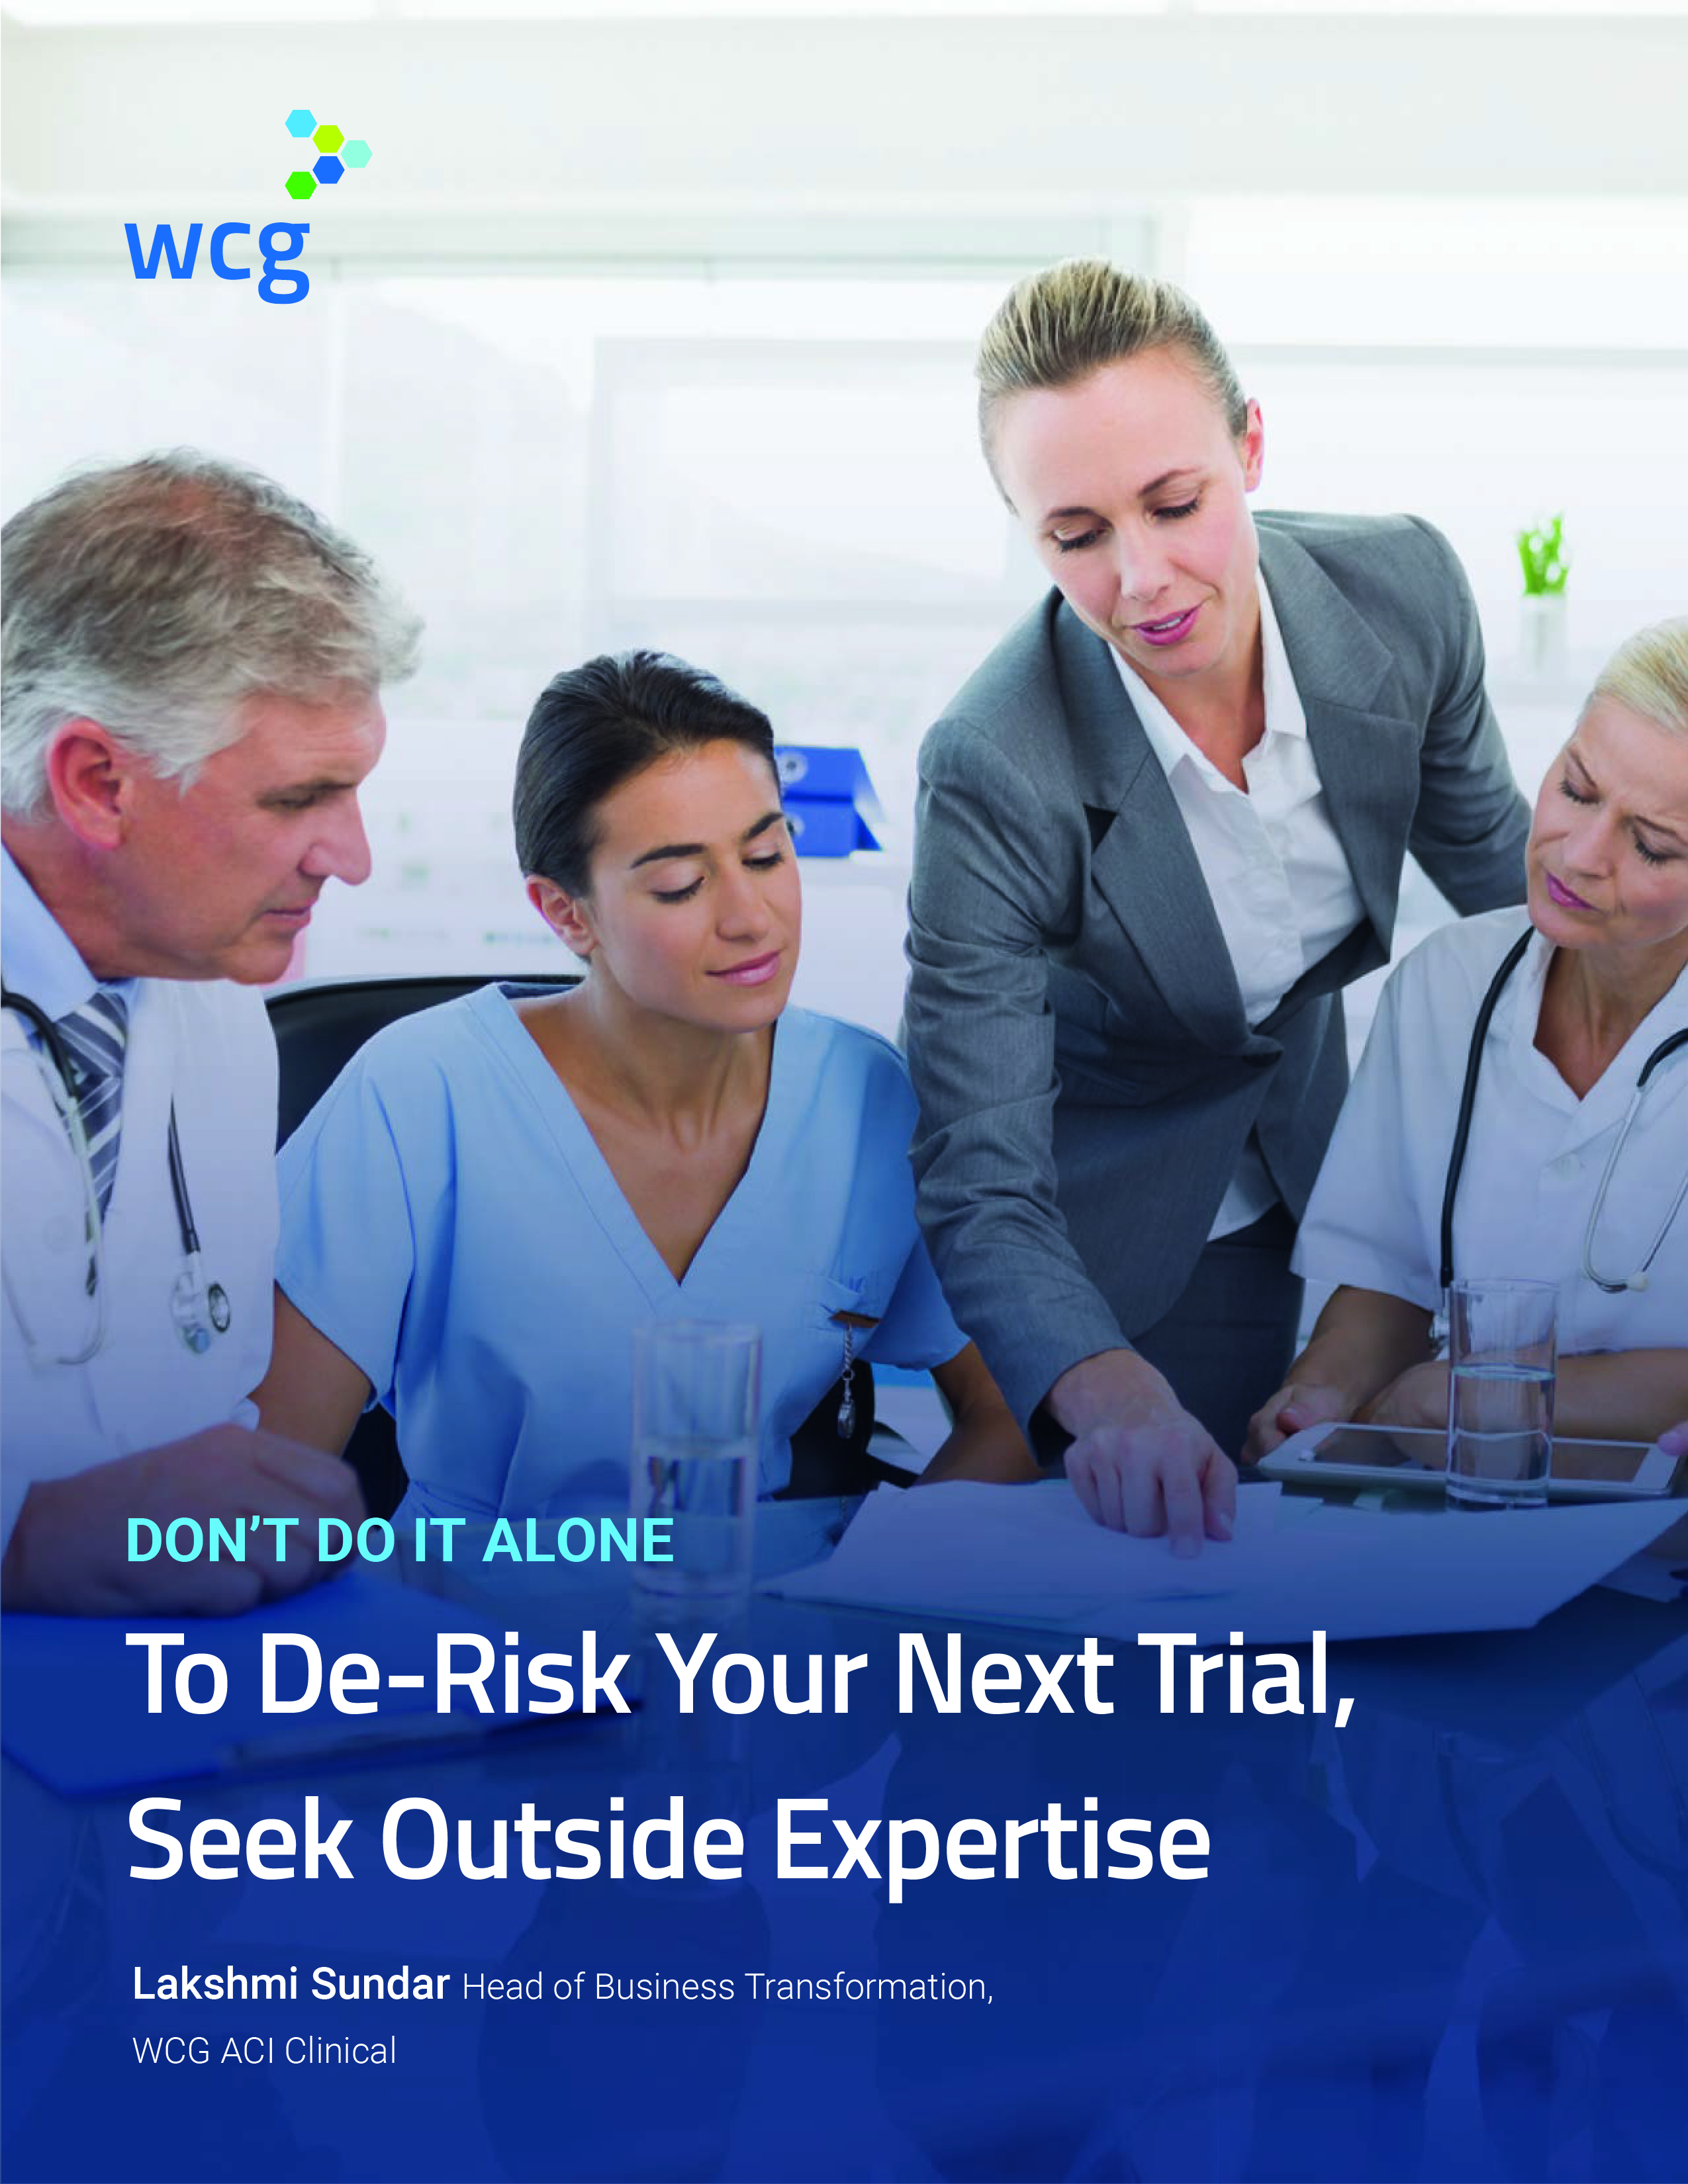 Don't Do It Alone: To De-Risk Your Next Trial, Seek Outside Expertise